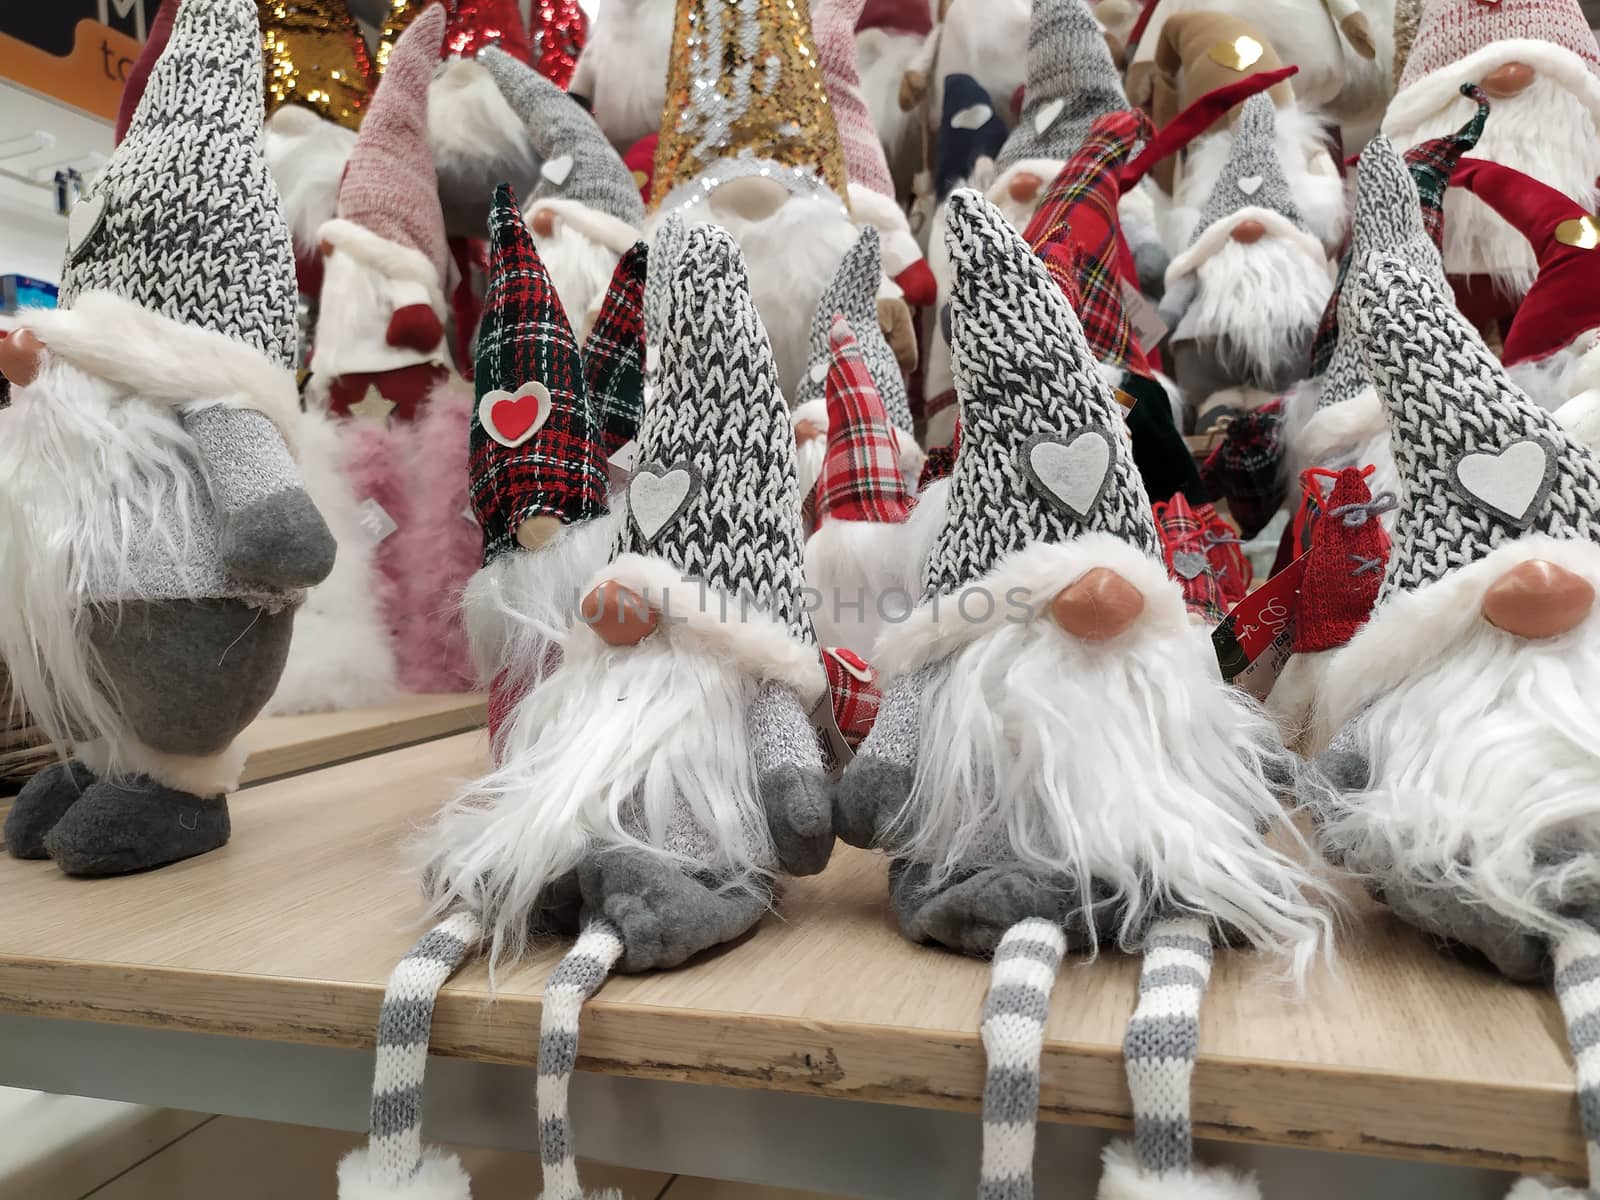 Christmas decorations displayed in a shop by brambillasimone